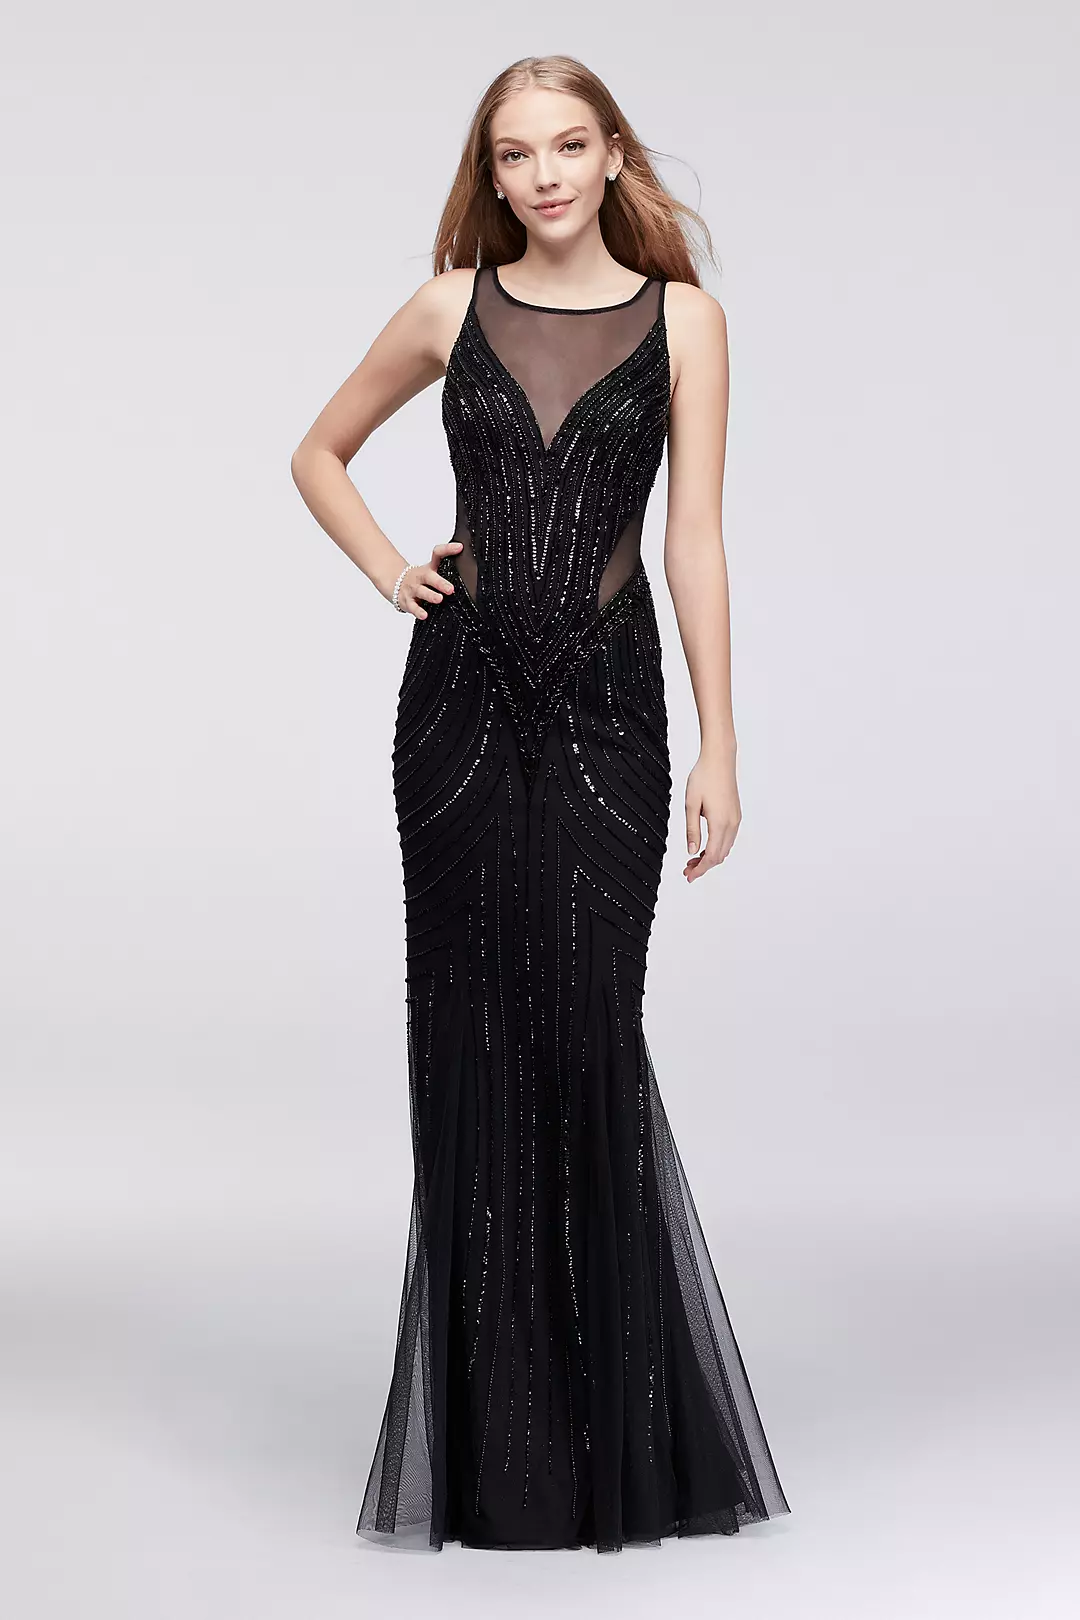 Beaded Mesh Mermaid Gown with Illusion Neckline Image